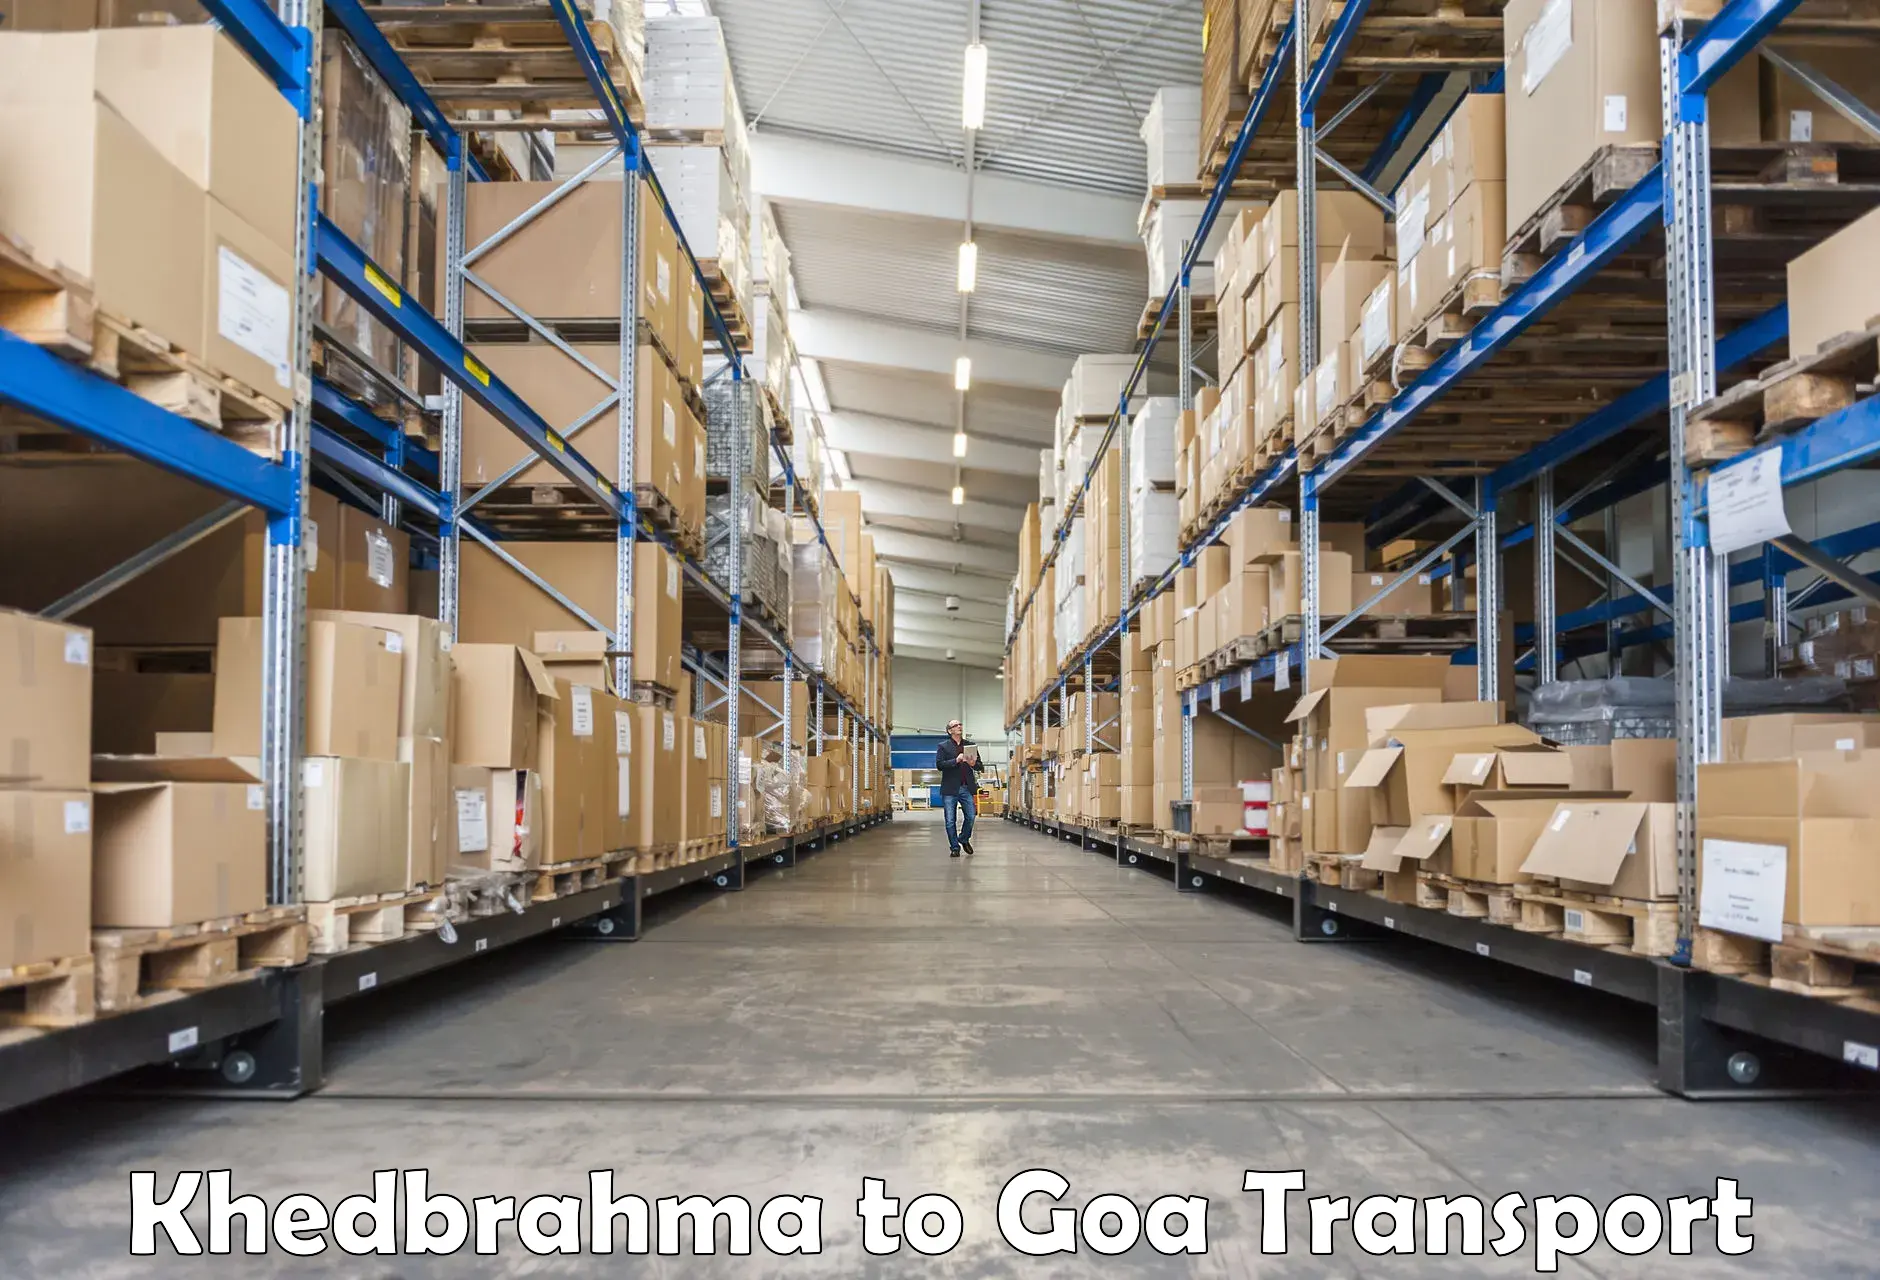 Transport in sharing Khedbrahma to South Goa